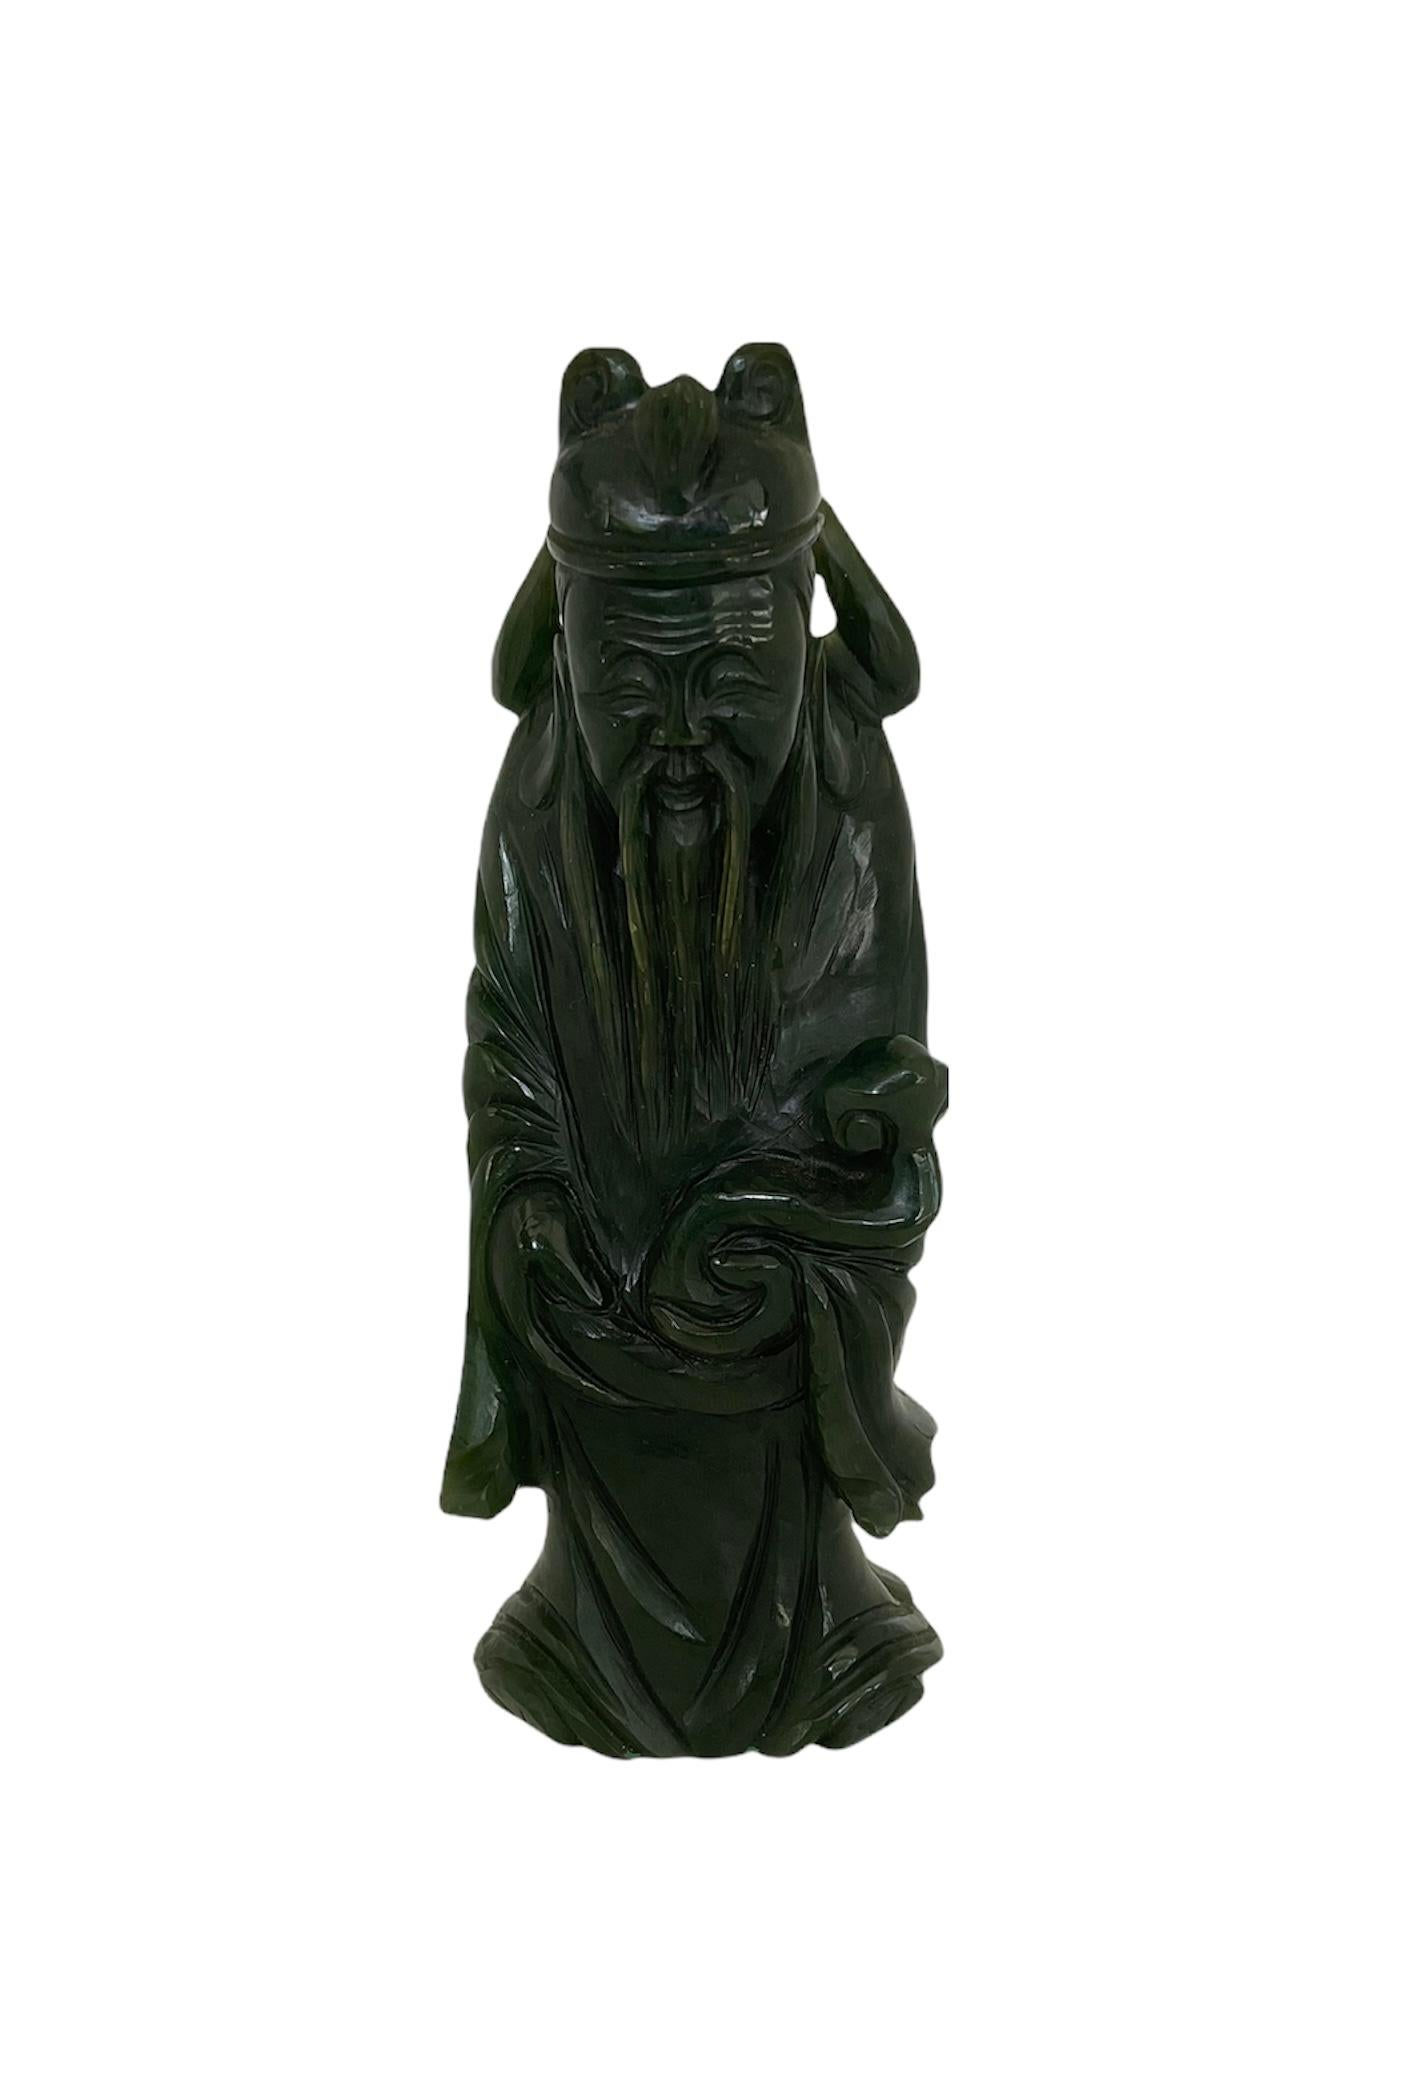 Hand Carved Green Pine Color Jade Small Chinese Wise Man Sculpture/Figurine 7